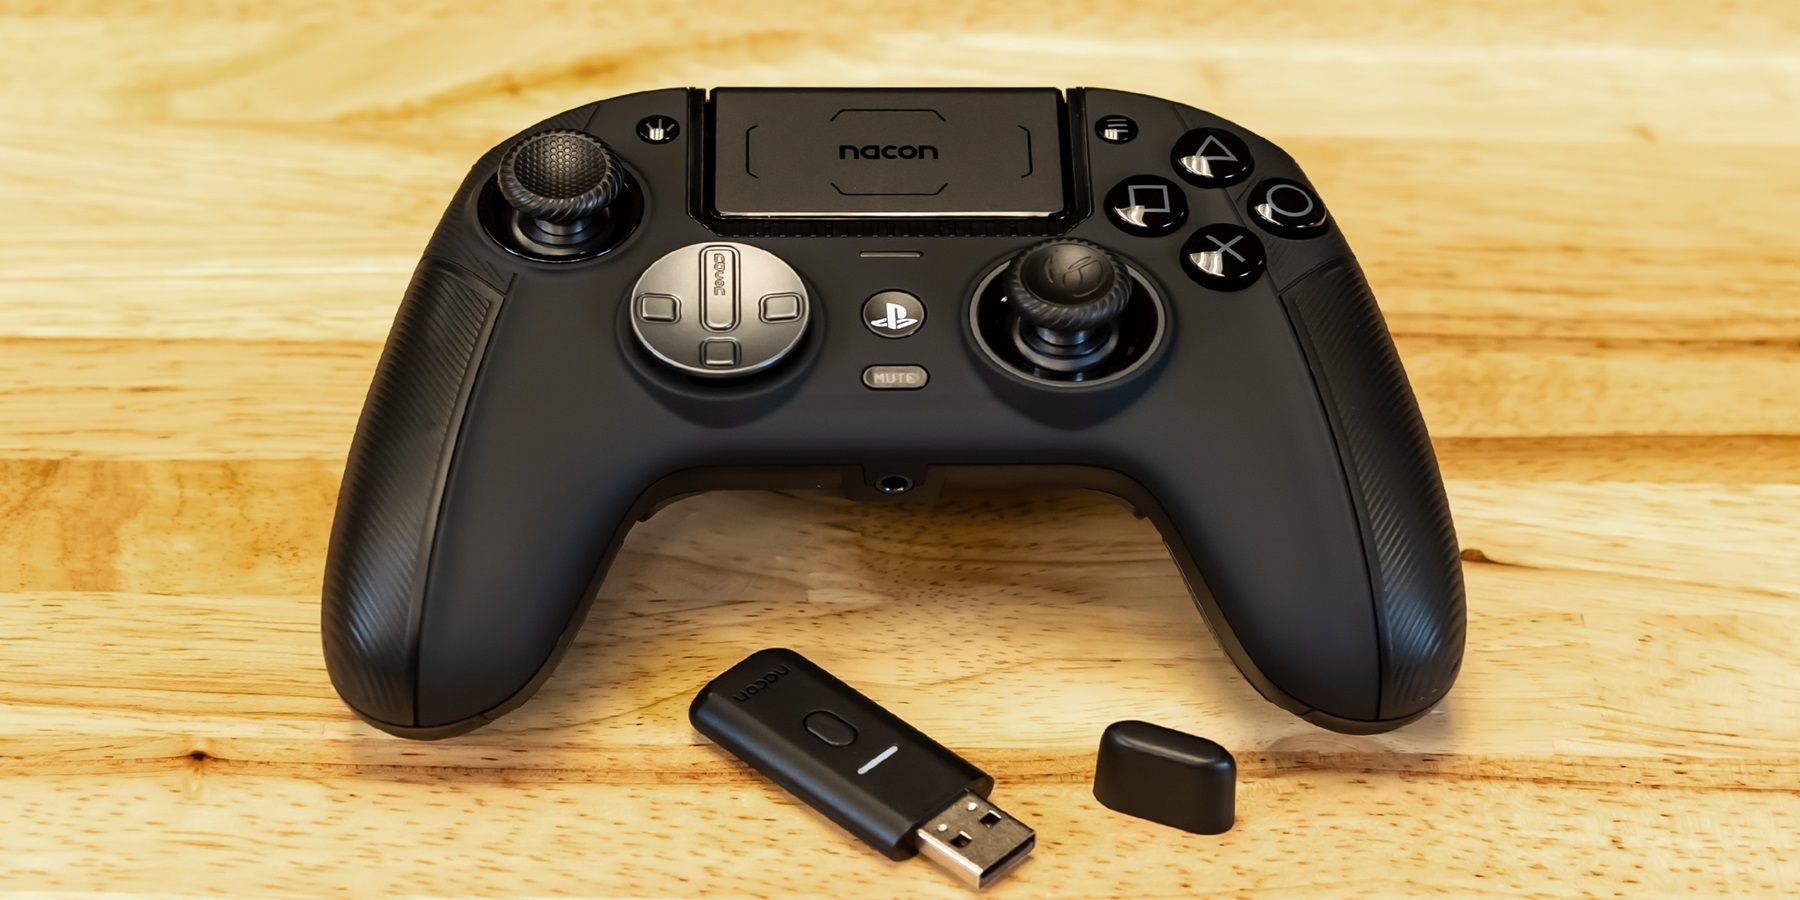 NACON REVOLUTION 5 PRO review: A super comfy PS5 controller that's  near-perfect for PC